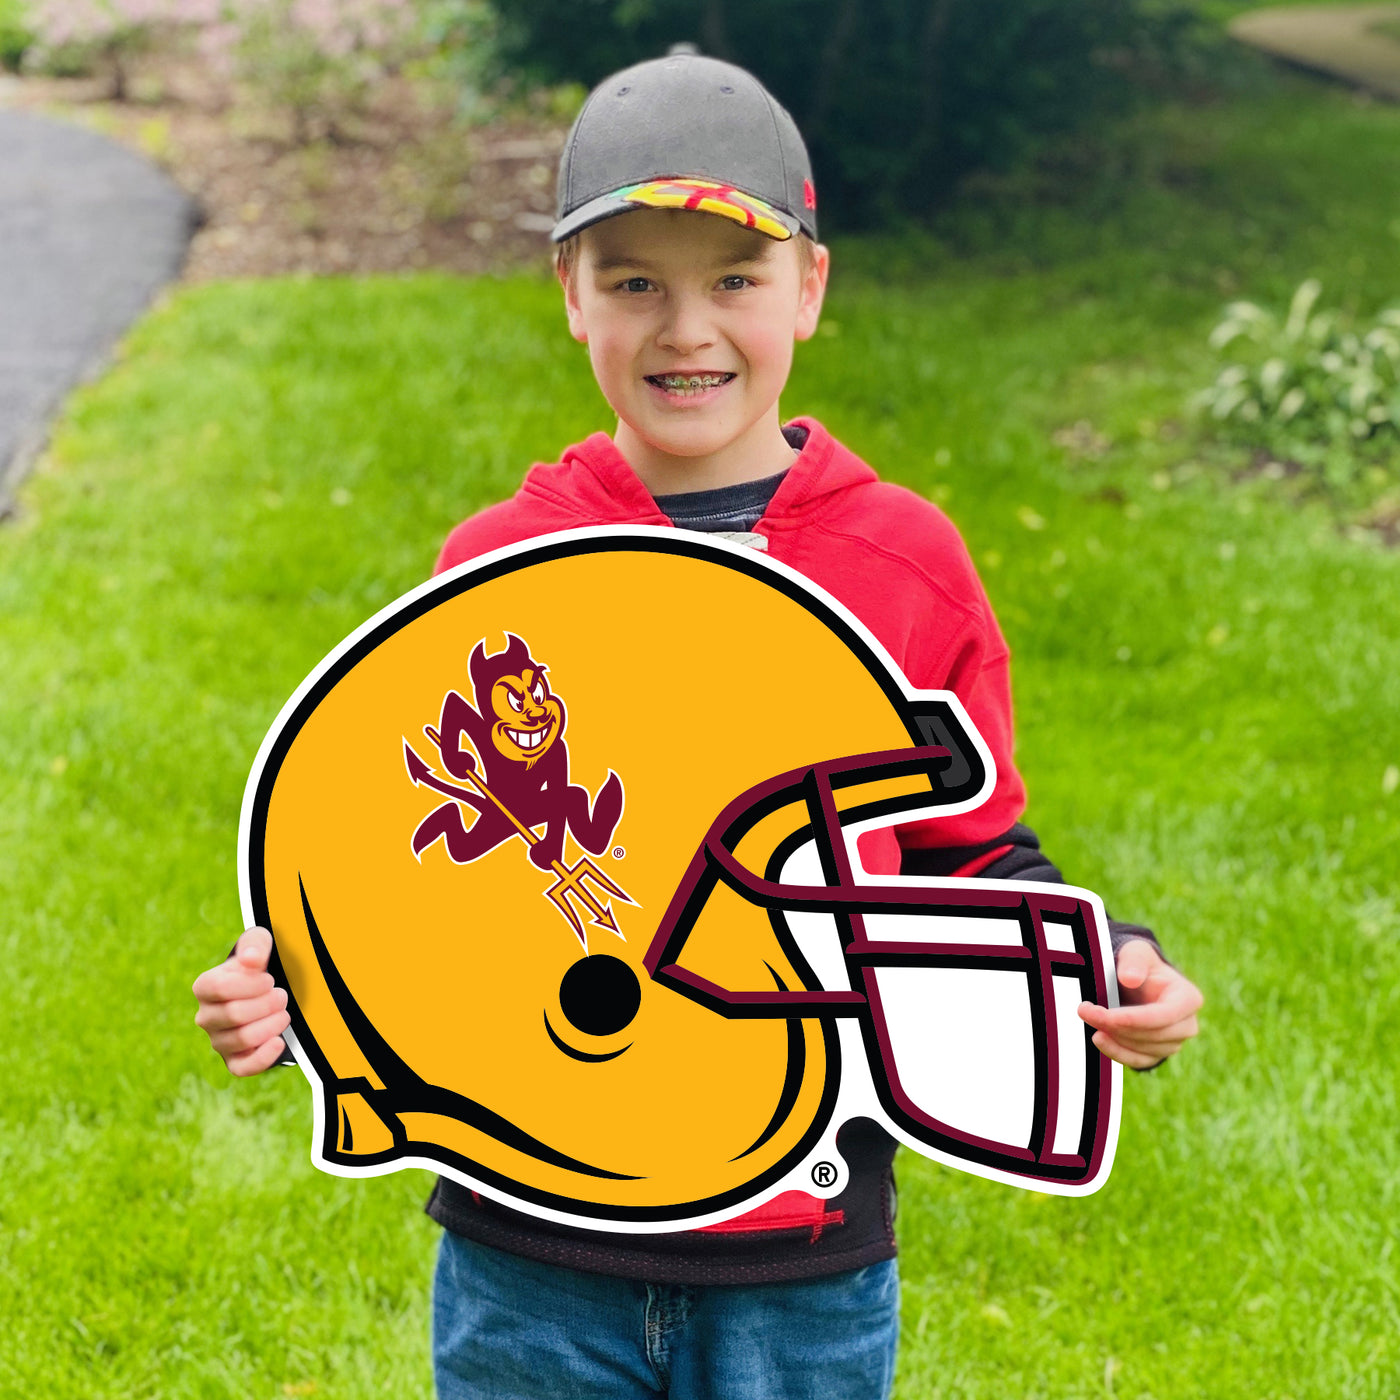 Boy hold ASU lawn sign in grass of gold football helmet with maroon  mask and Sparky on side